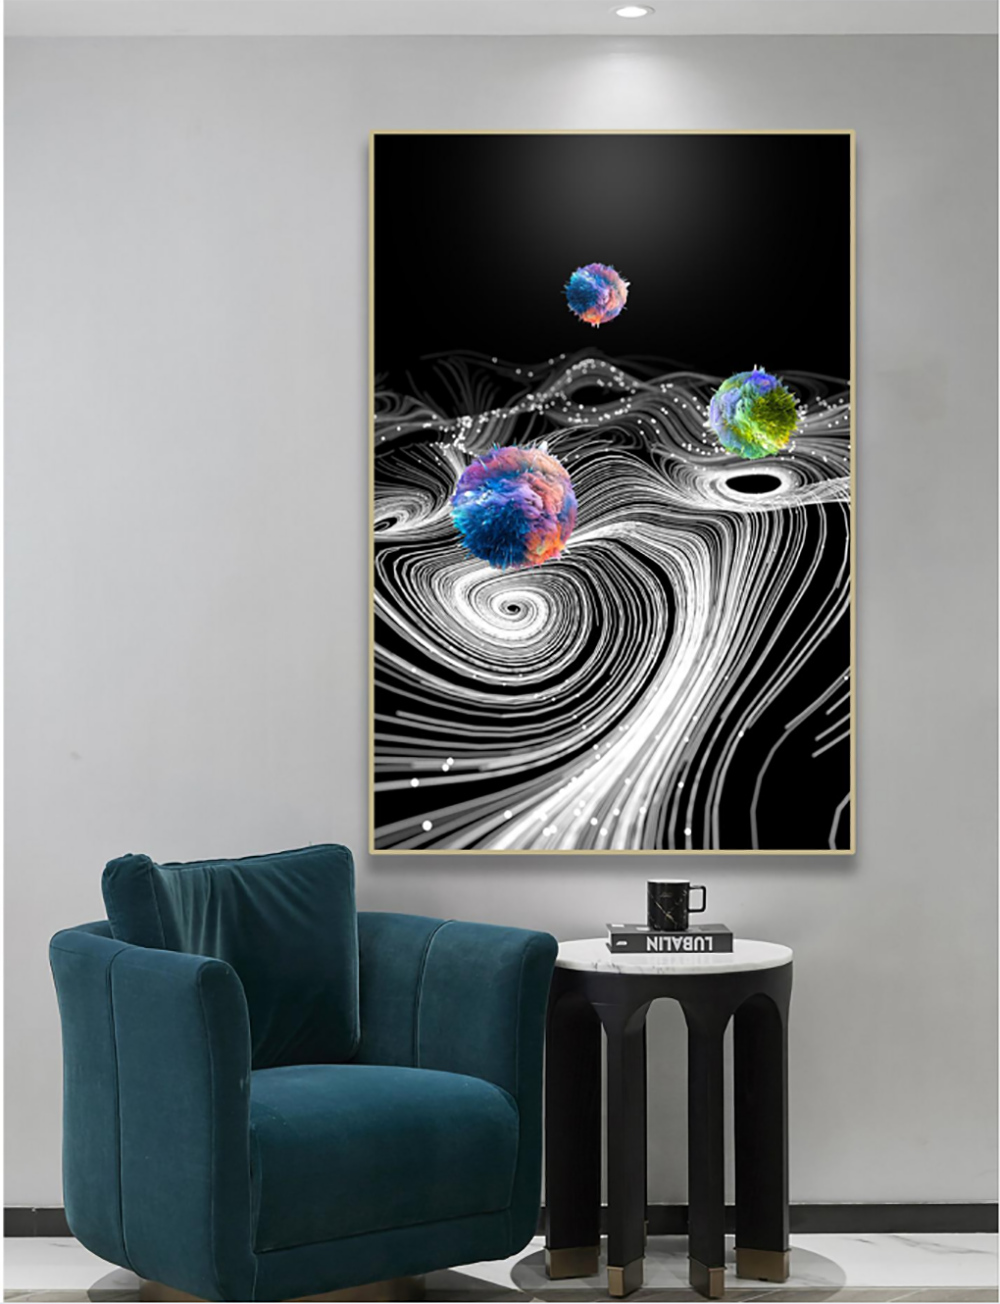 Ladole Rugs Canvas Abstract Art Print 30x40 cm Wall Décor Framed Artwork - Square Canvas World Prints Picture Frame for Gallery Wall Kit, Home Decoration